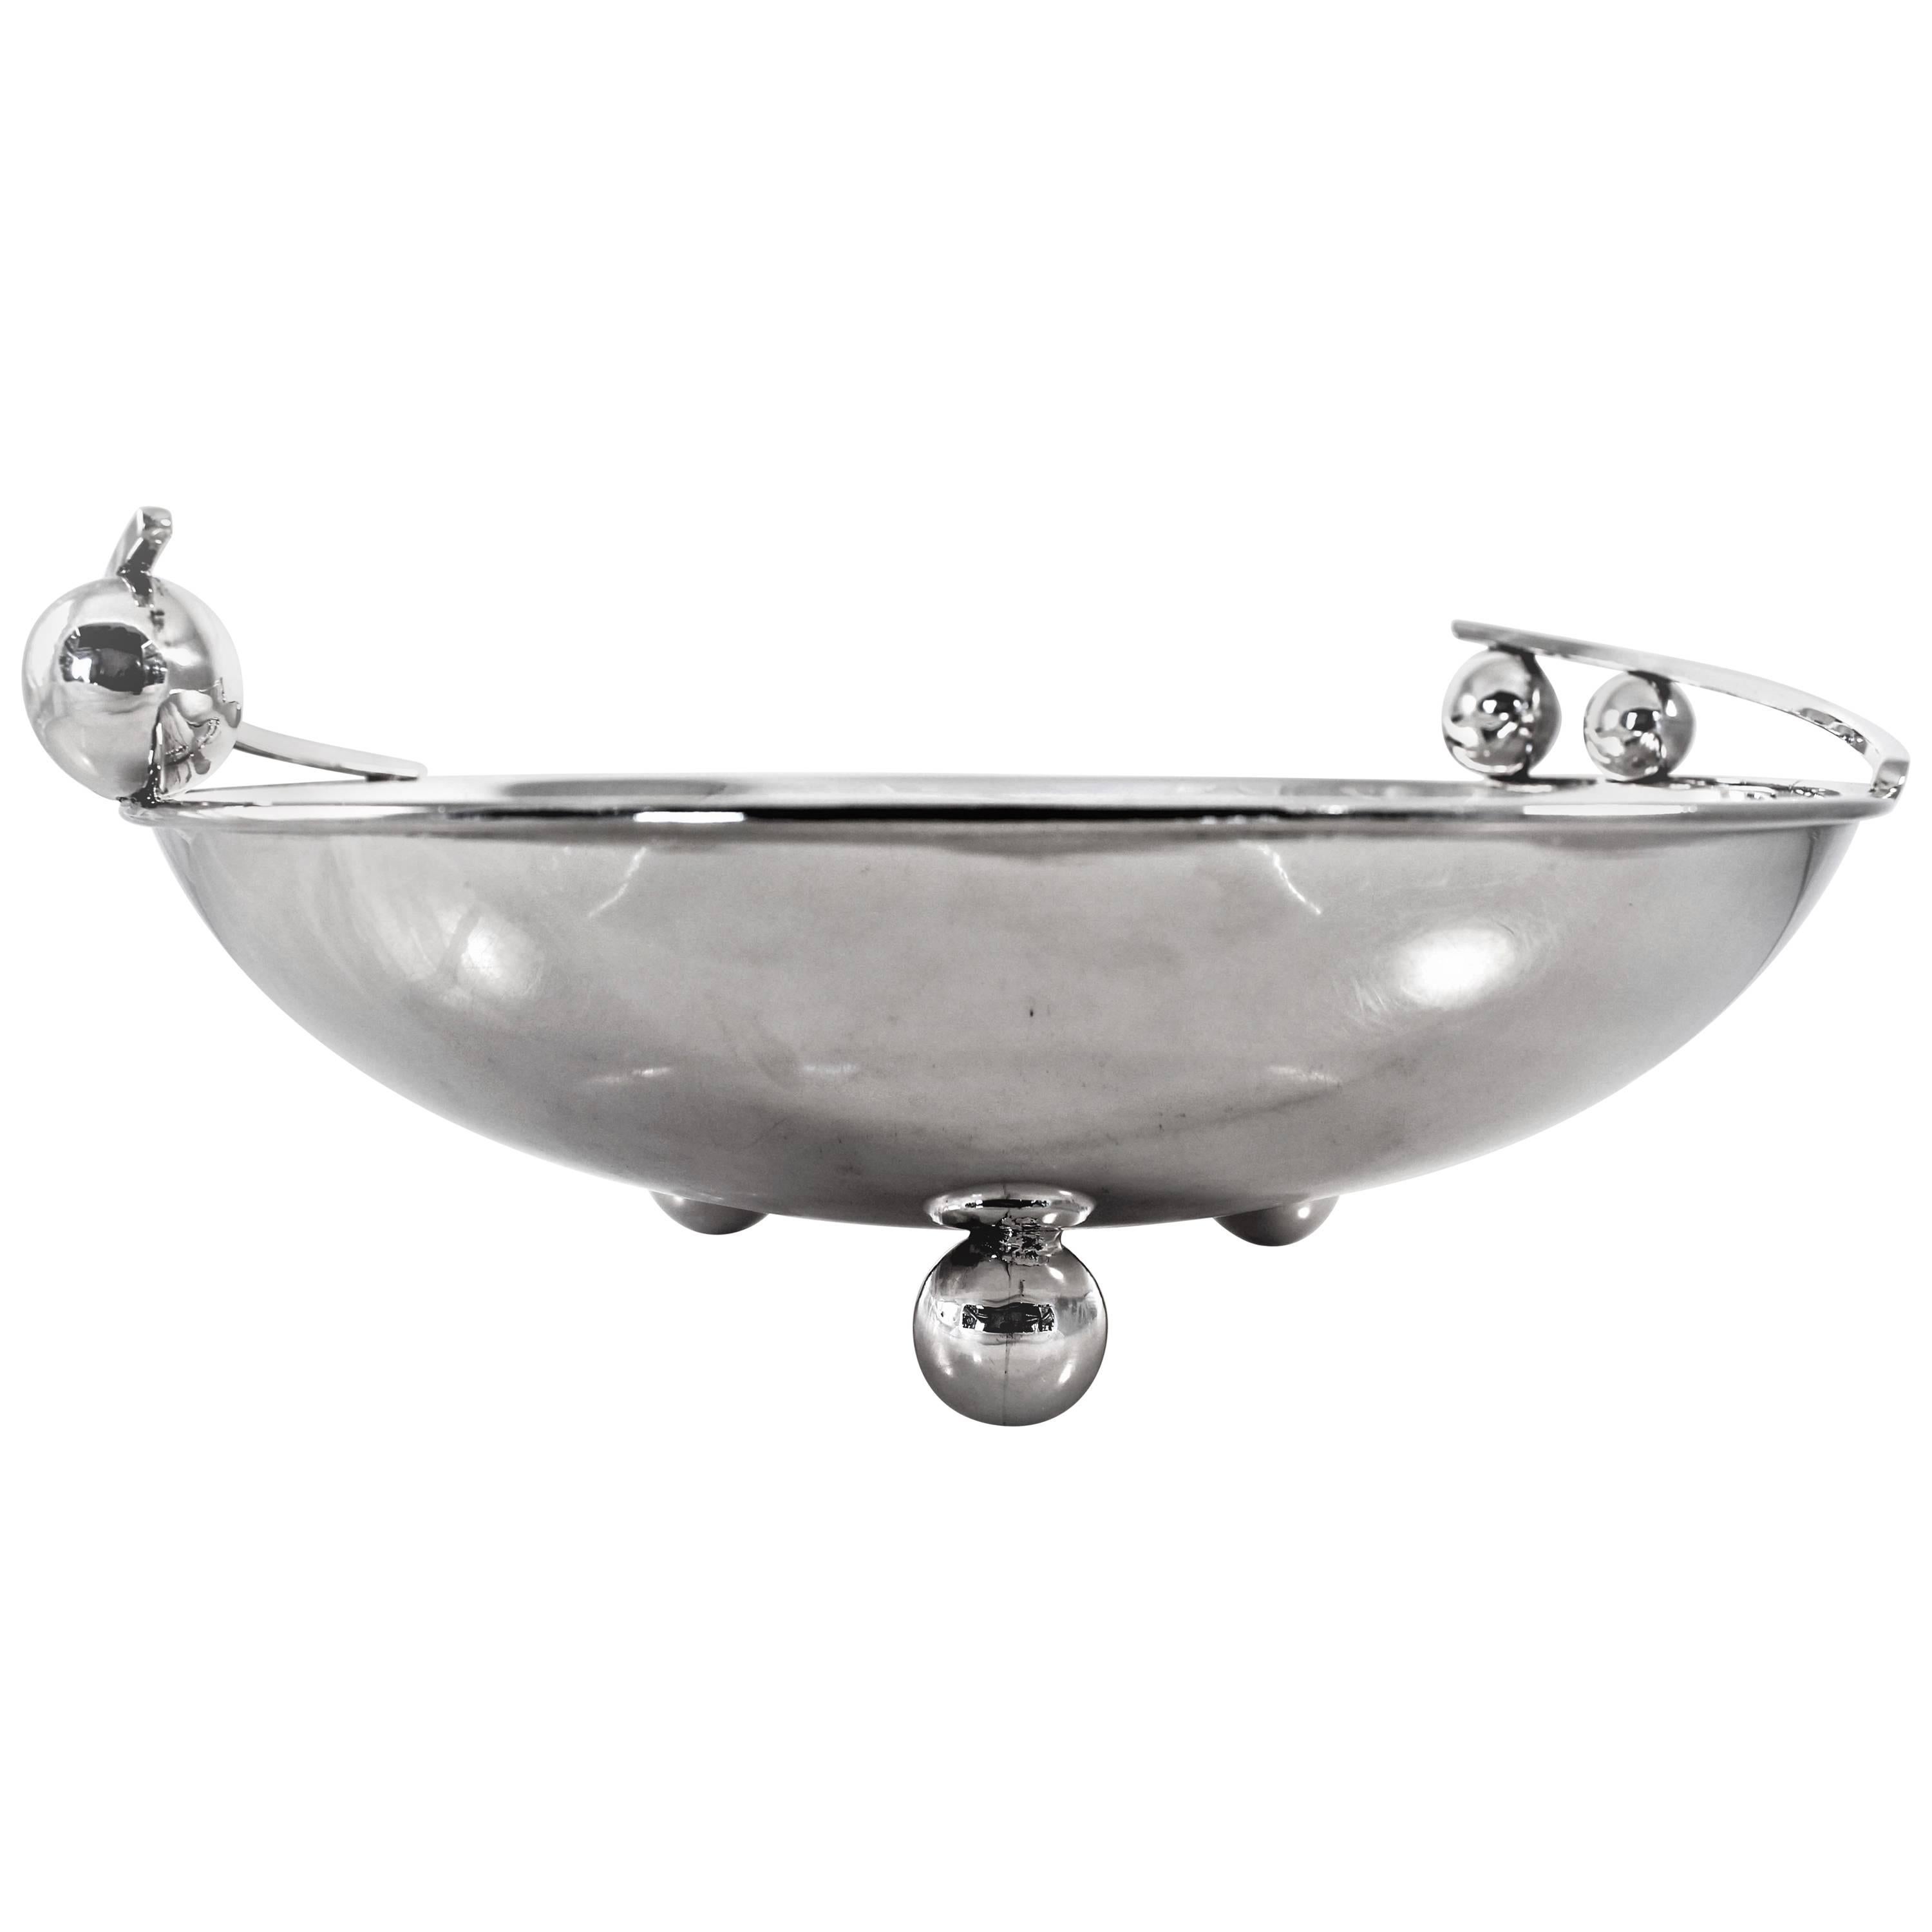 We’re absolutely crazy over this uber-modern large bowl. It has a Danish / Jensen-esque look to it. There are three large balls on the bottom, raising it off the surface. On each side of the top, a piece of silver jets out from the bowl and is held